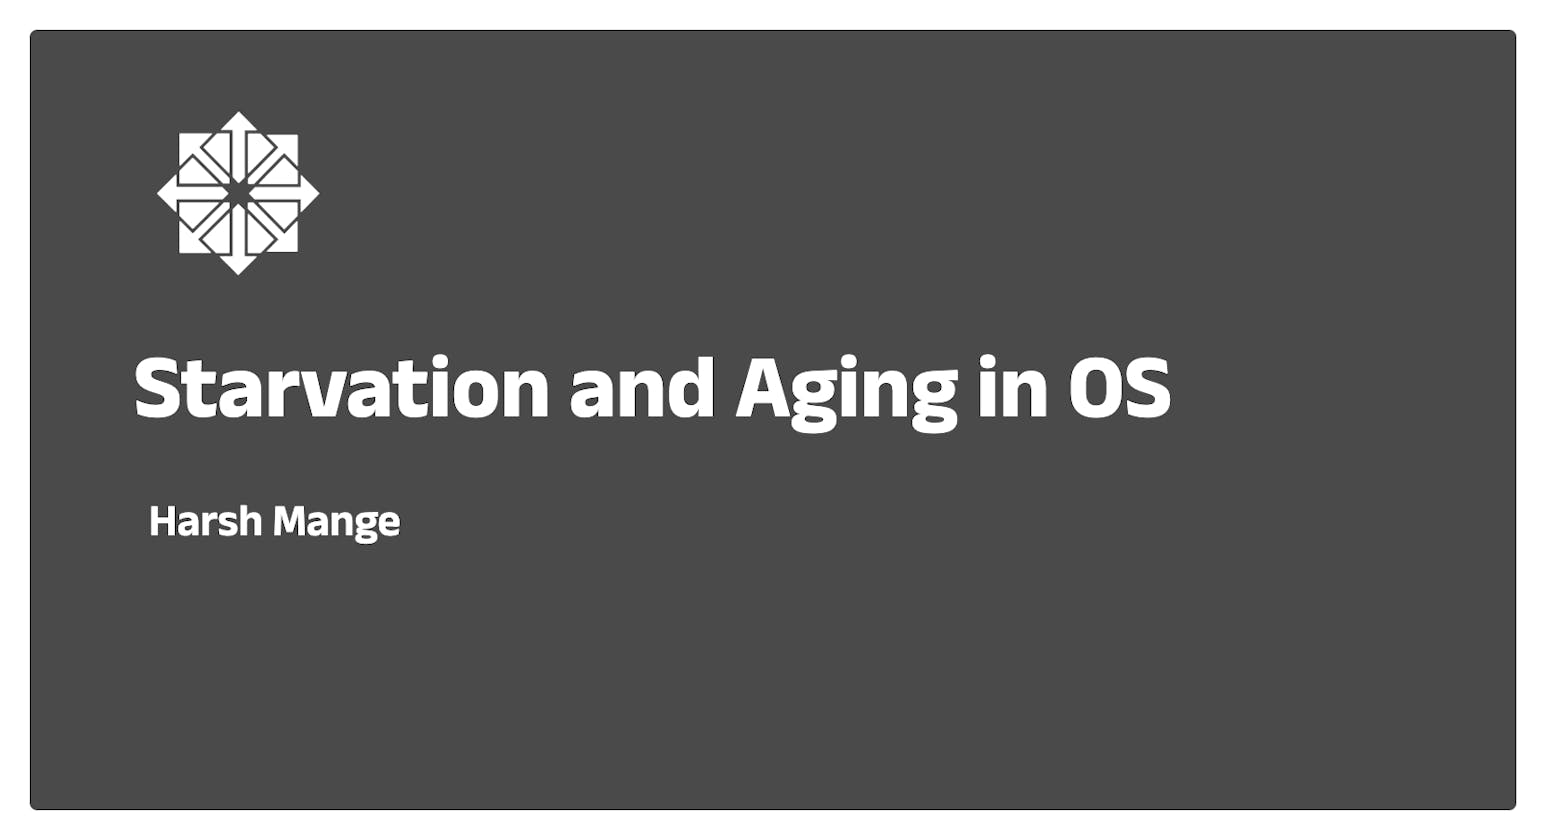 Understanding Starvation and Aging in Operating Systems: Causes and Solutions